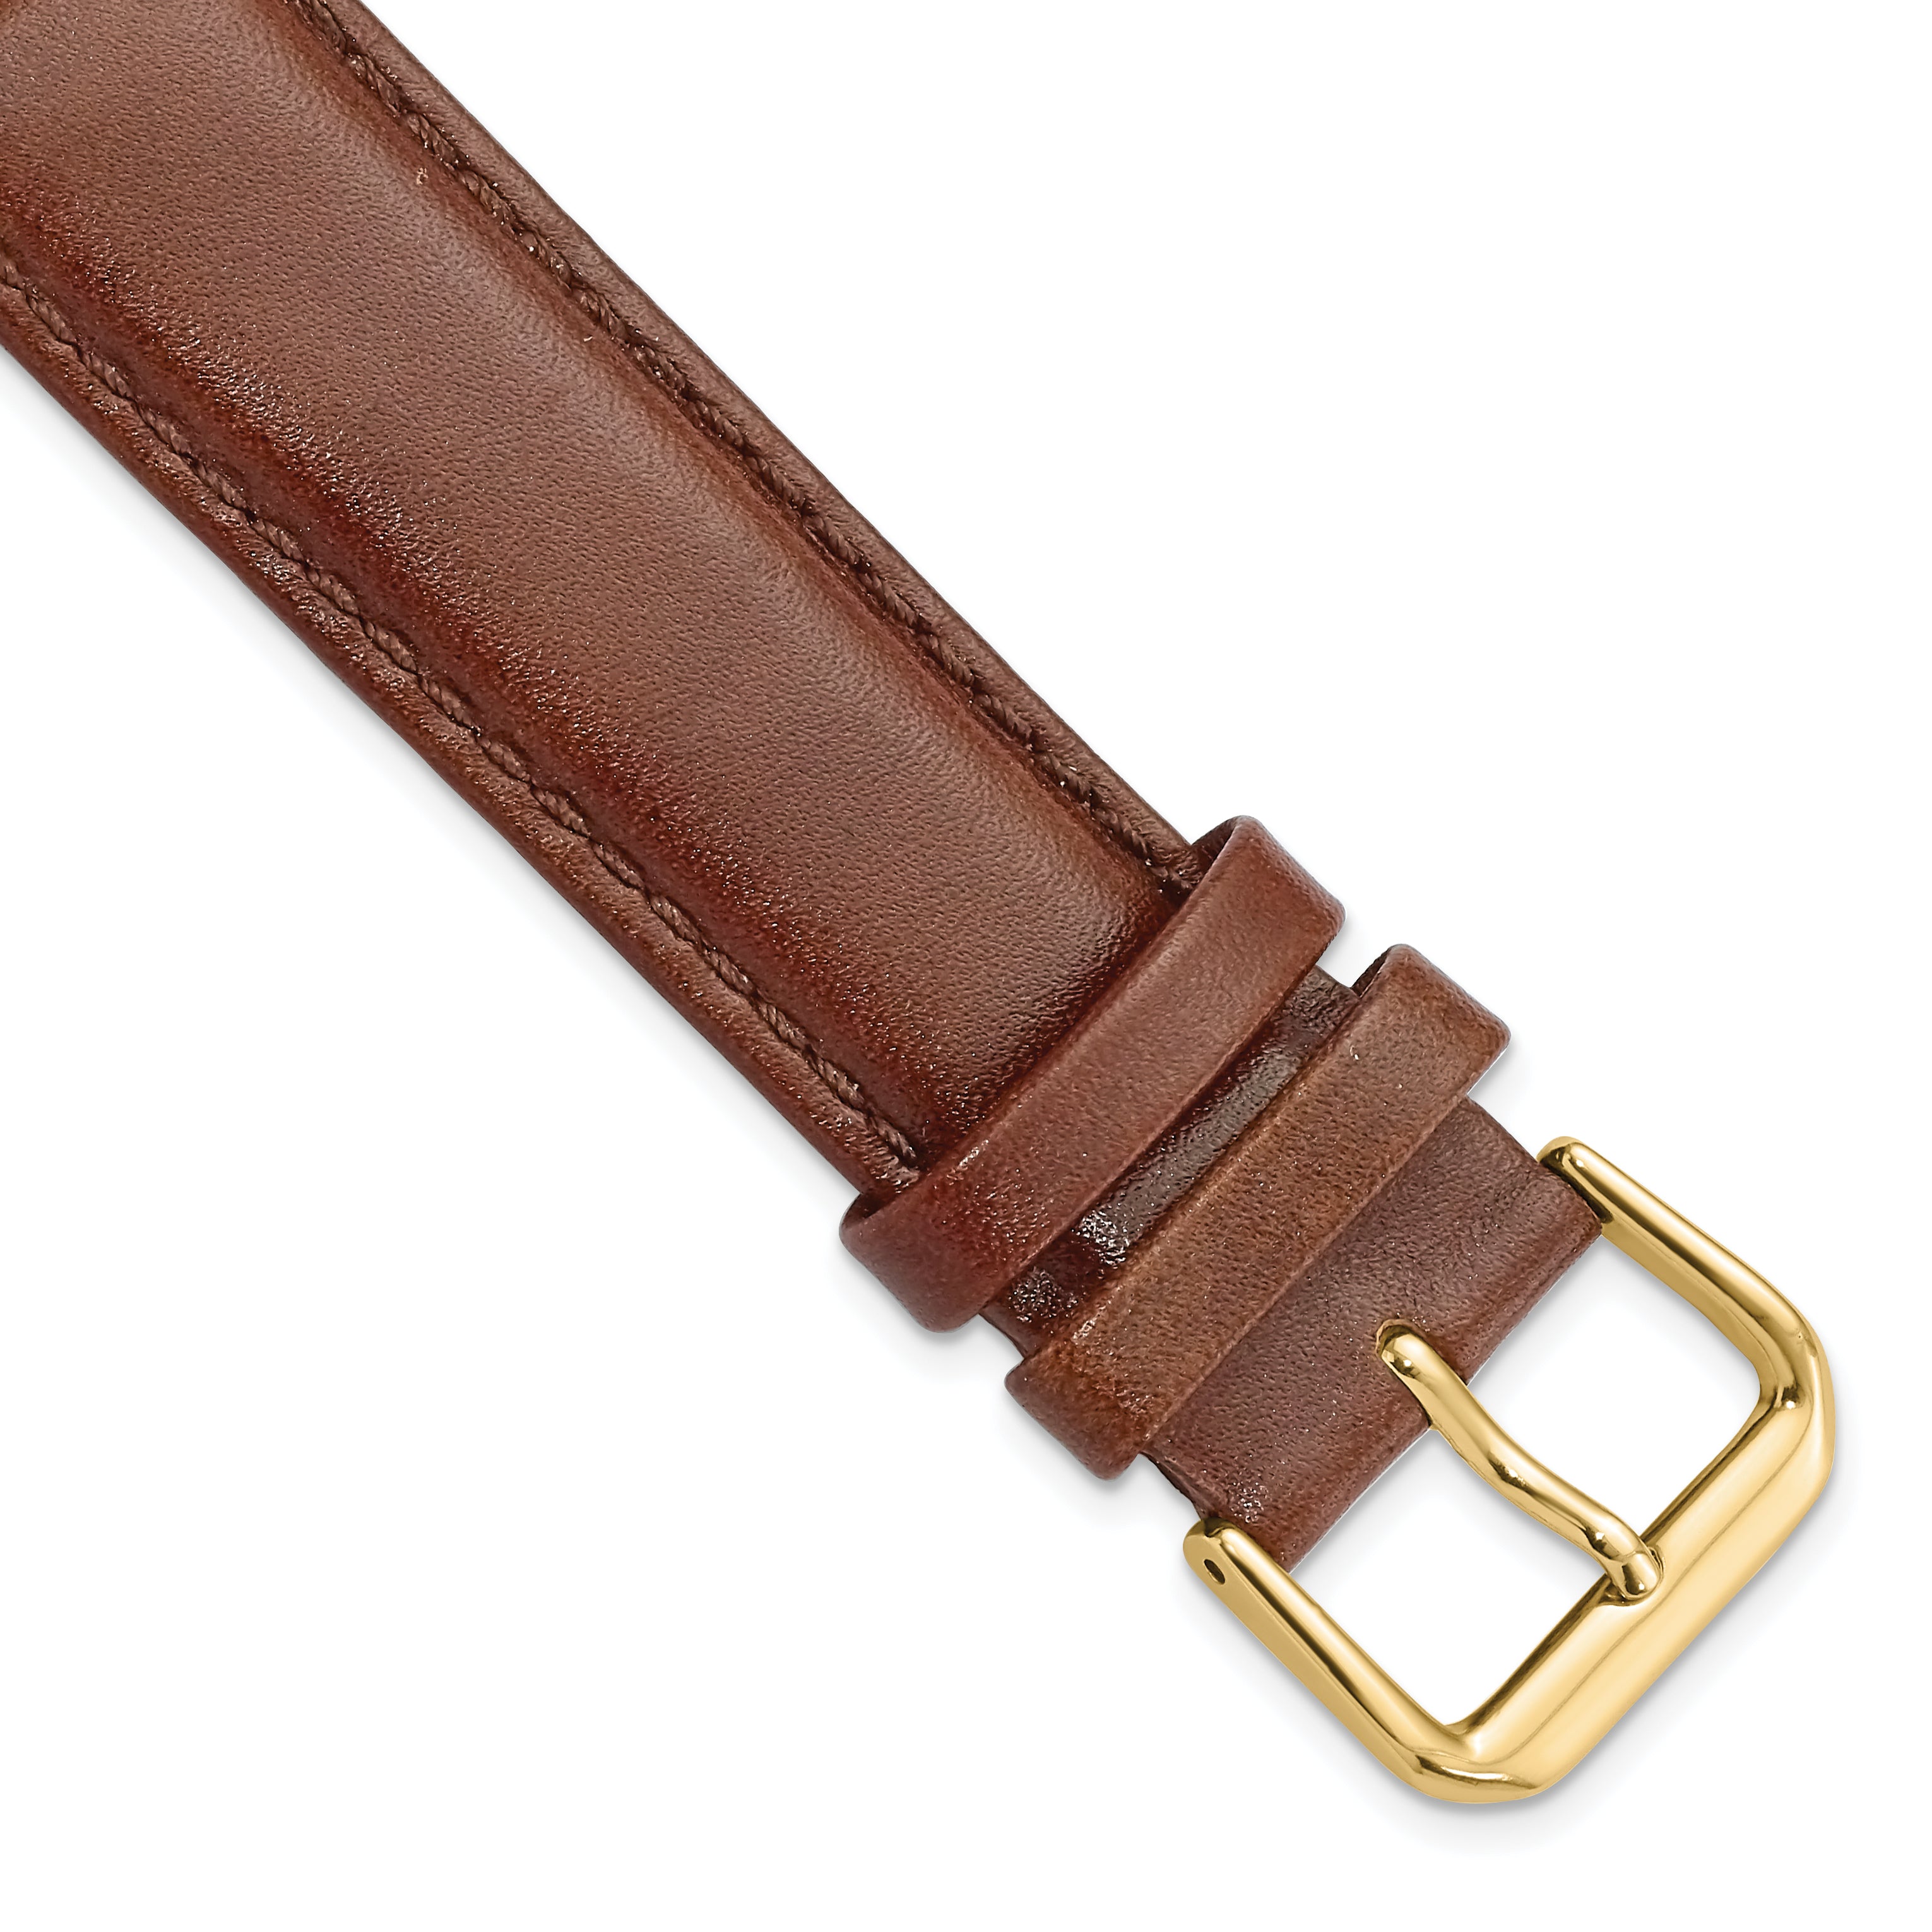 DeBeer 19mm Havana Smooth Leather with Gold-tone Buckle 7.5 inch Watch Band